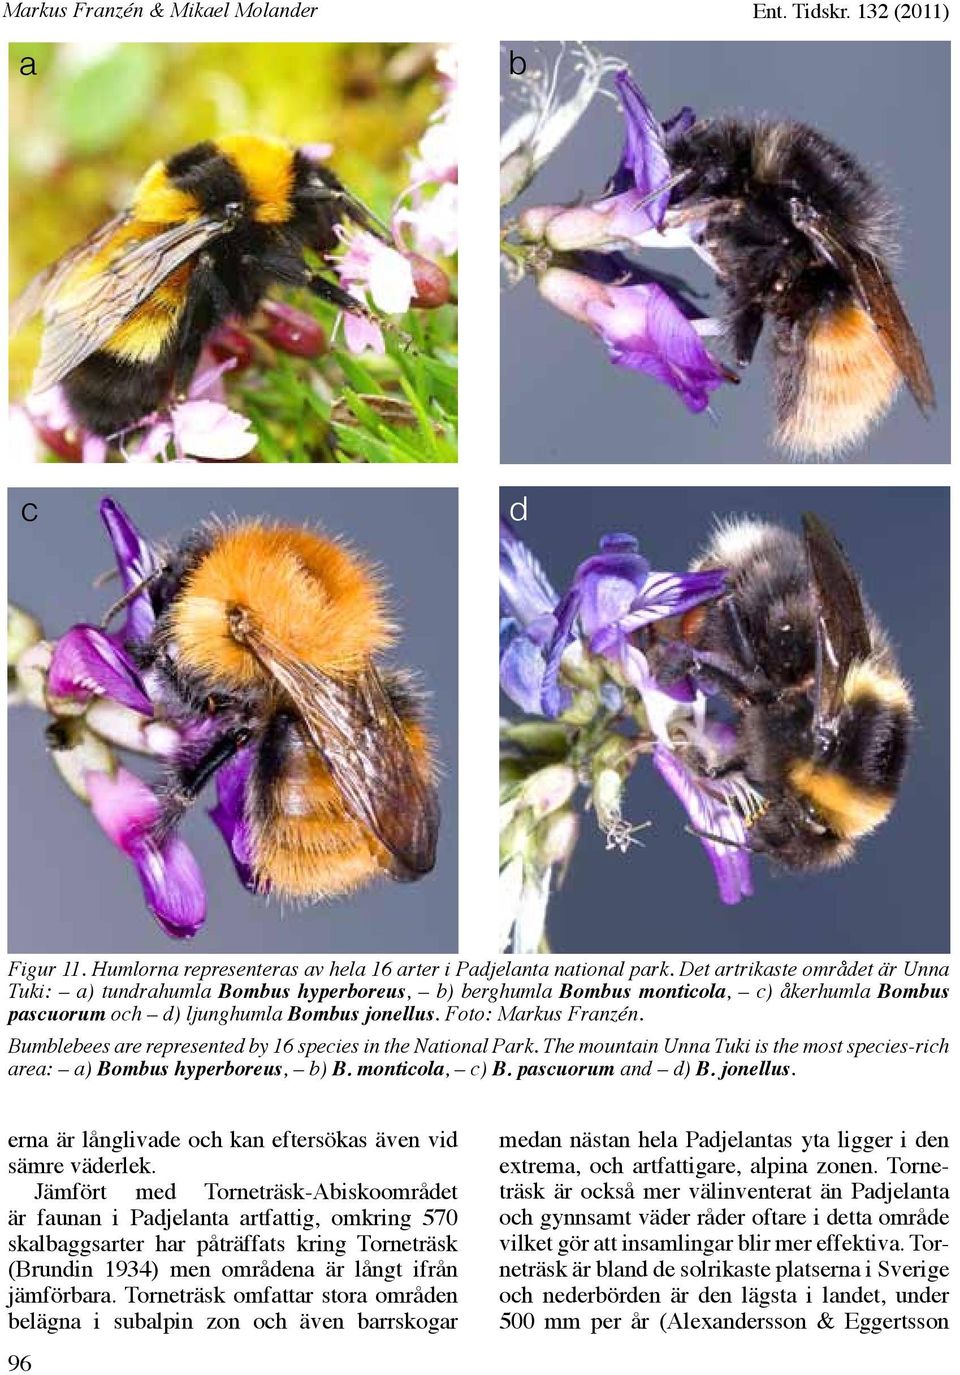 Bumblebees are represented by 16 species in the National Park. The mountain Unna Tuki is the most species-rich area: a) Bombus hyperboreus, b) B. monticola, c) B. pascuorum and d) B. jonellus.